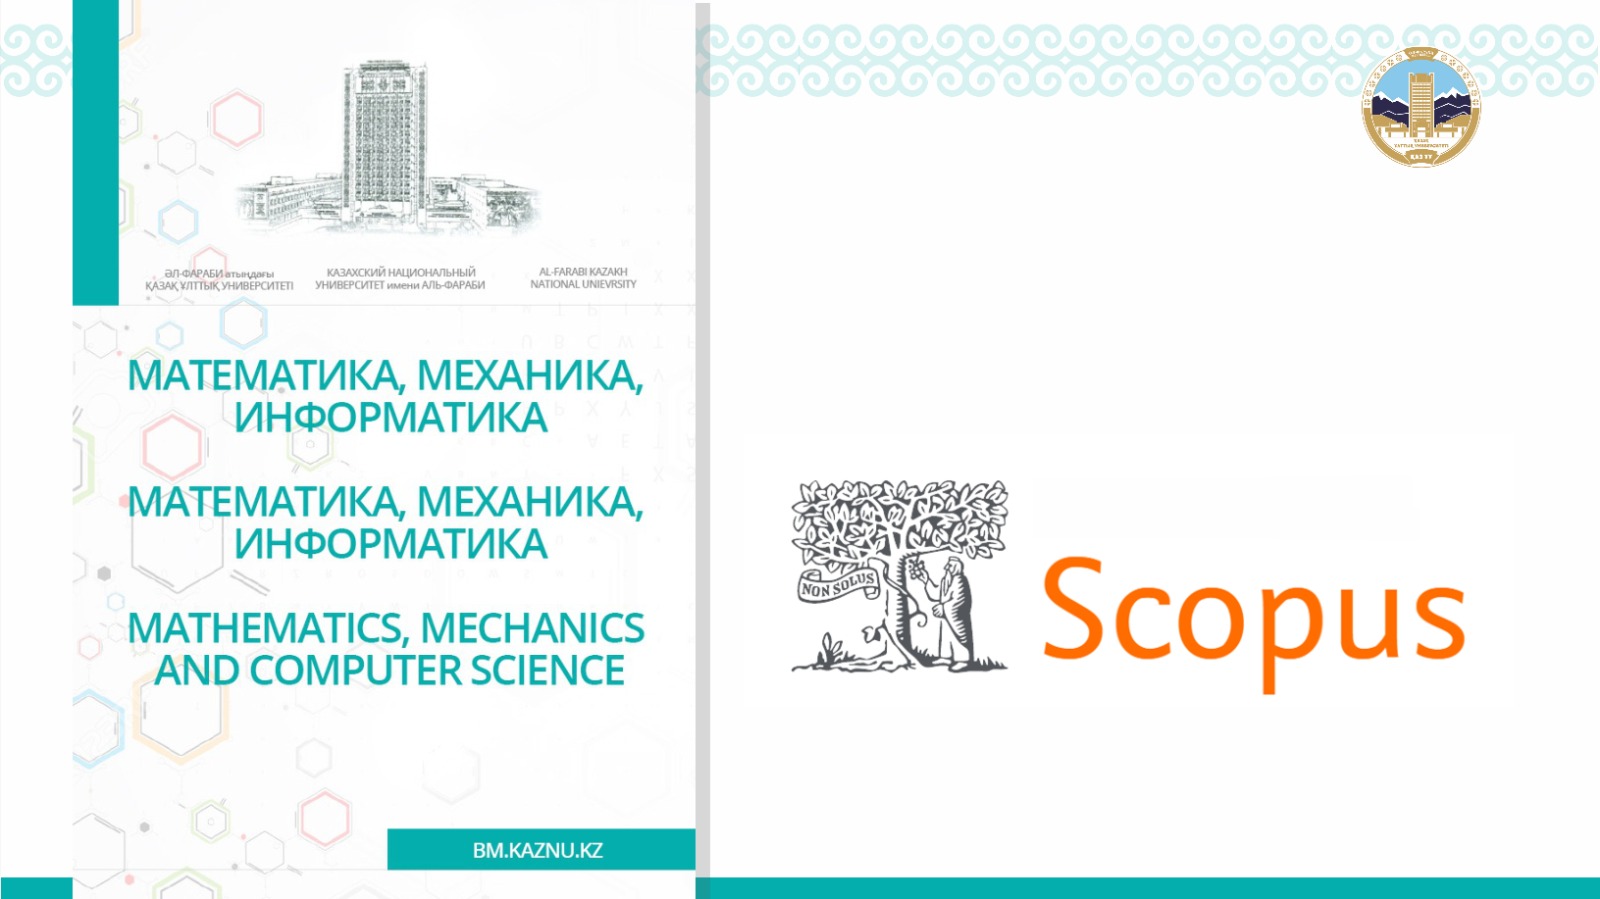 Another scientific journal of KazNU included in Scopus